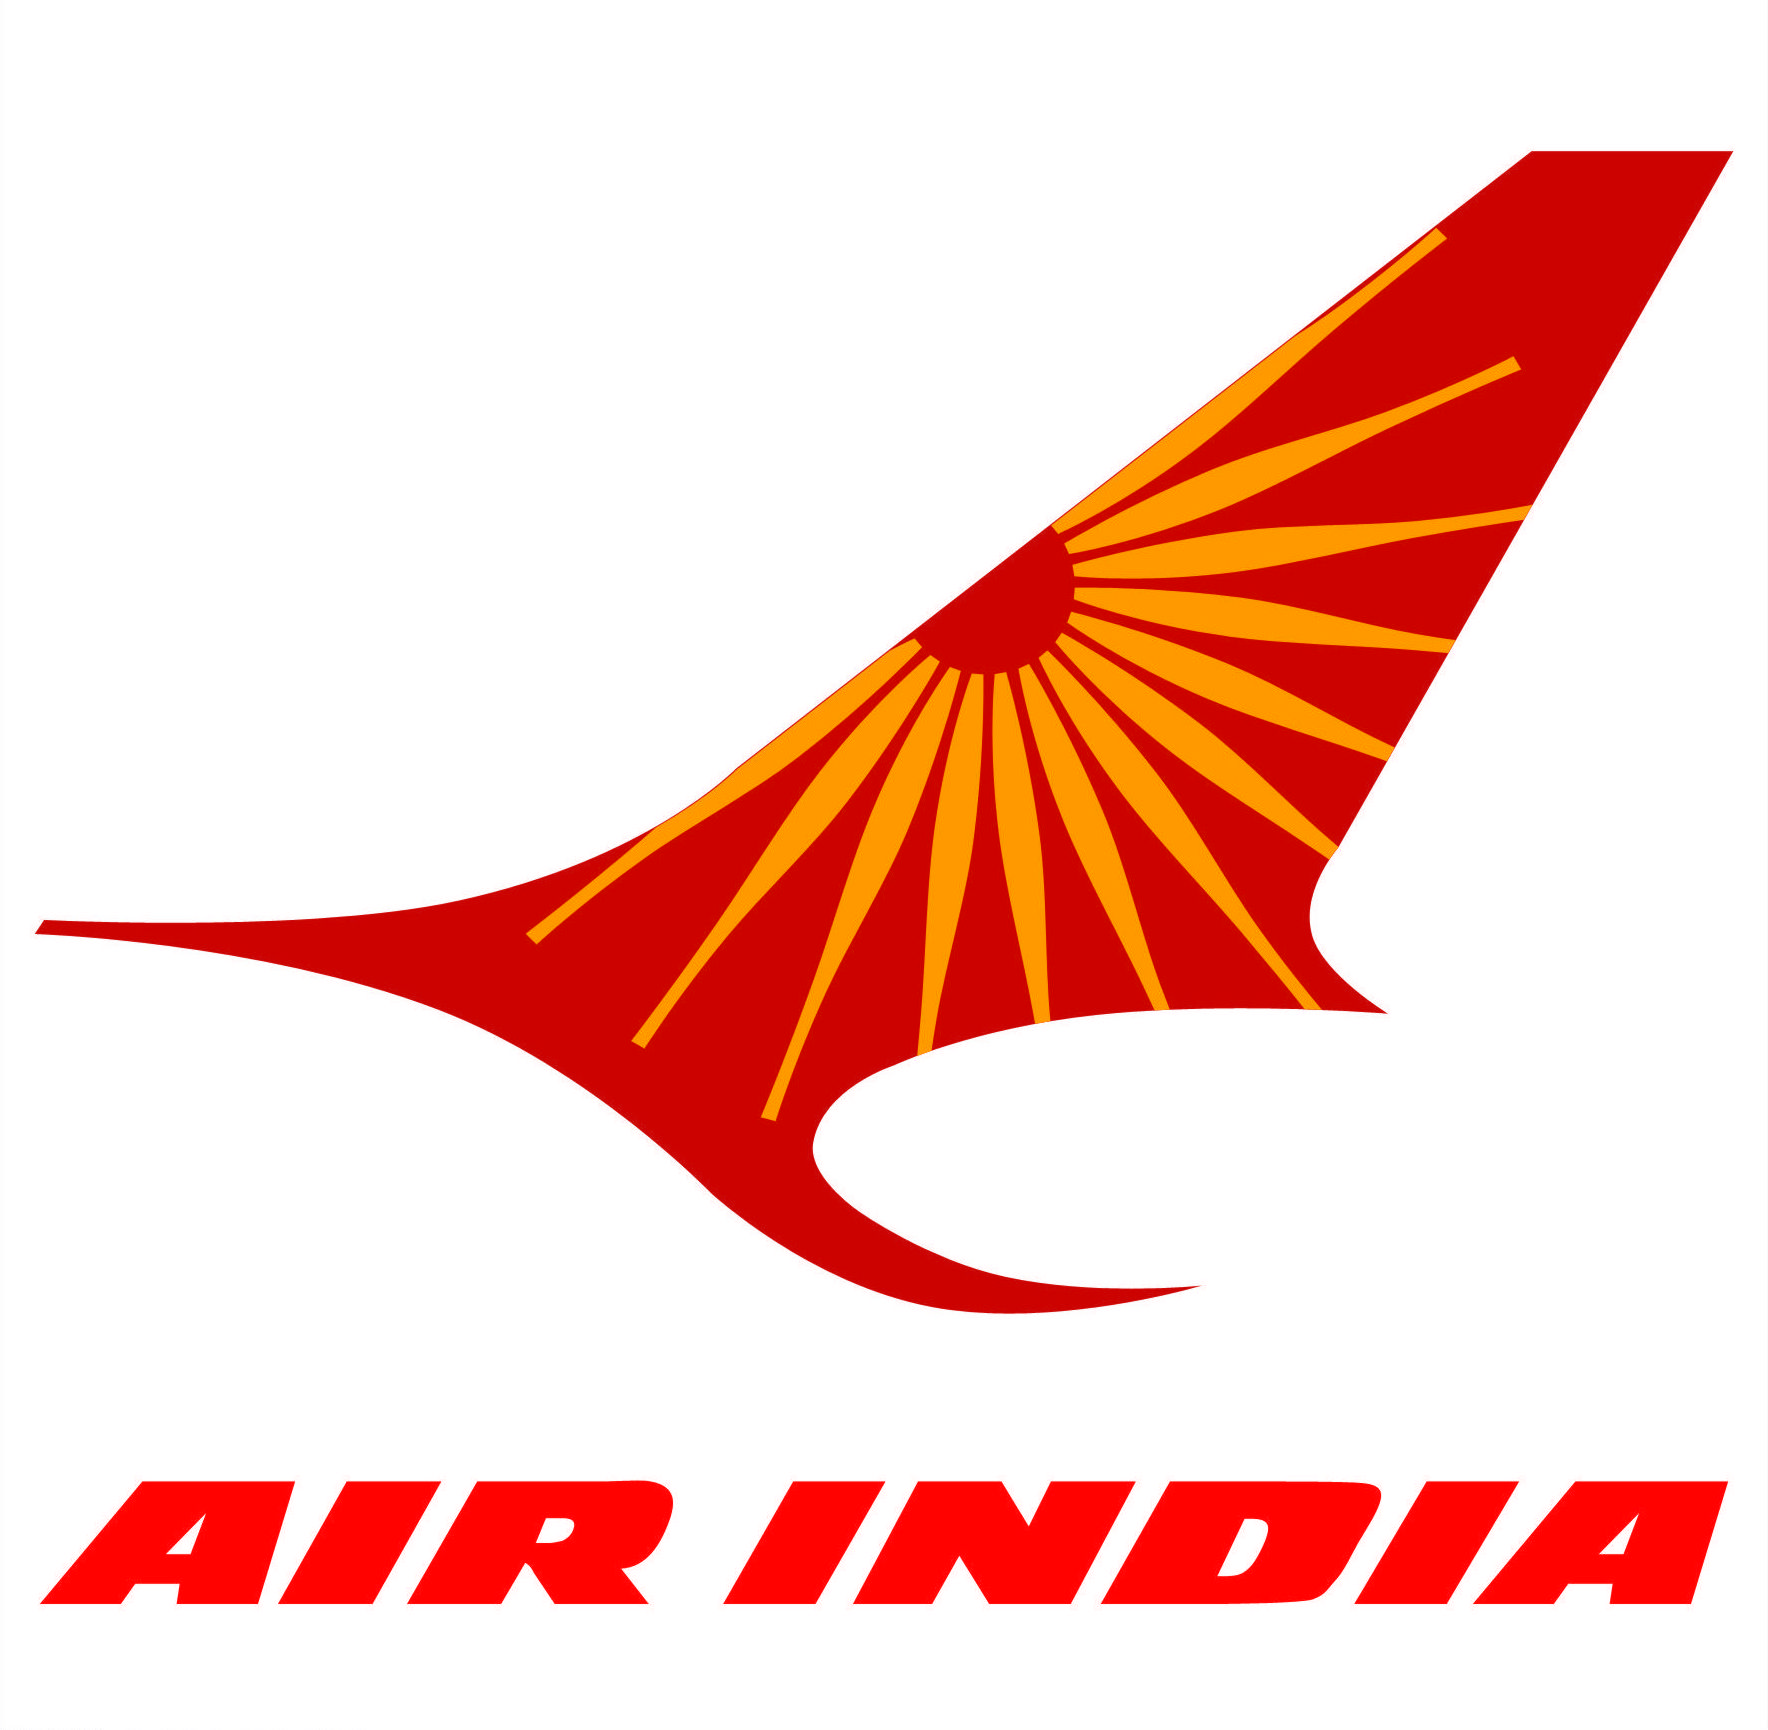 AIESL Aircraft Technician Admit Card 2016-17 to be released for download @ www.airindia.in